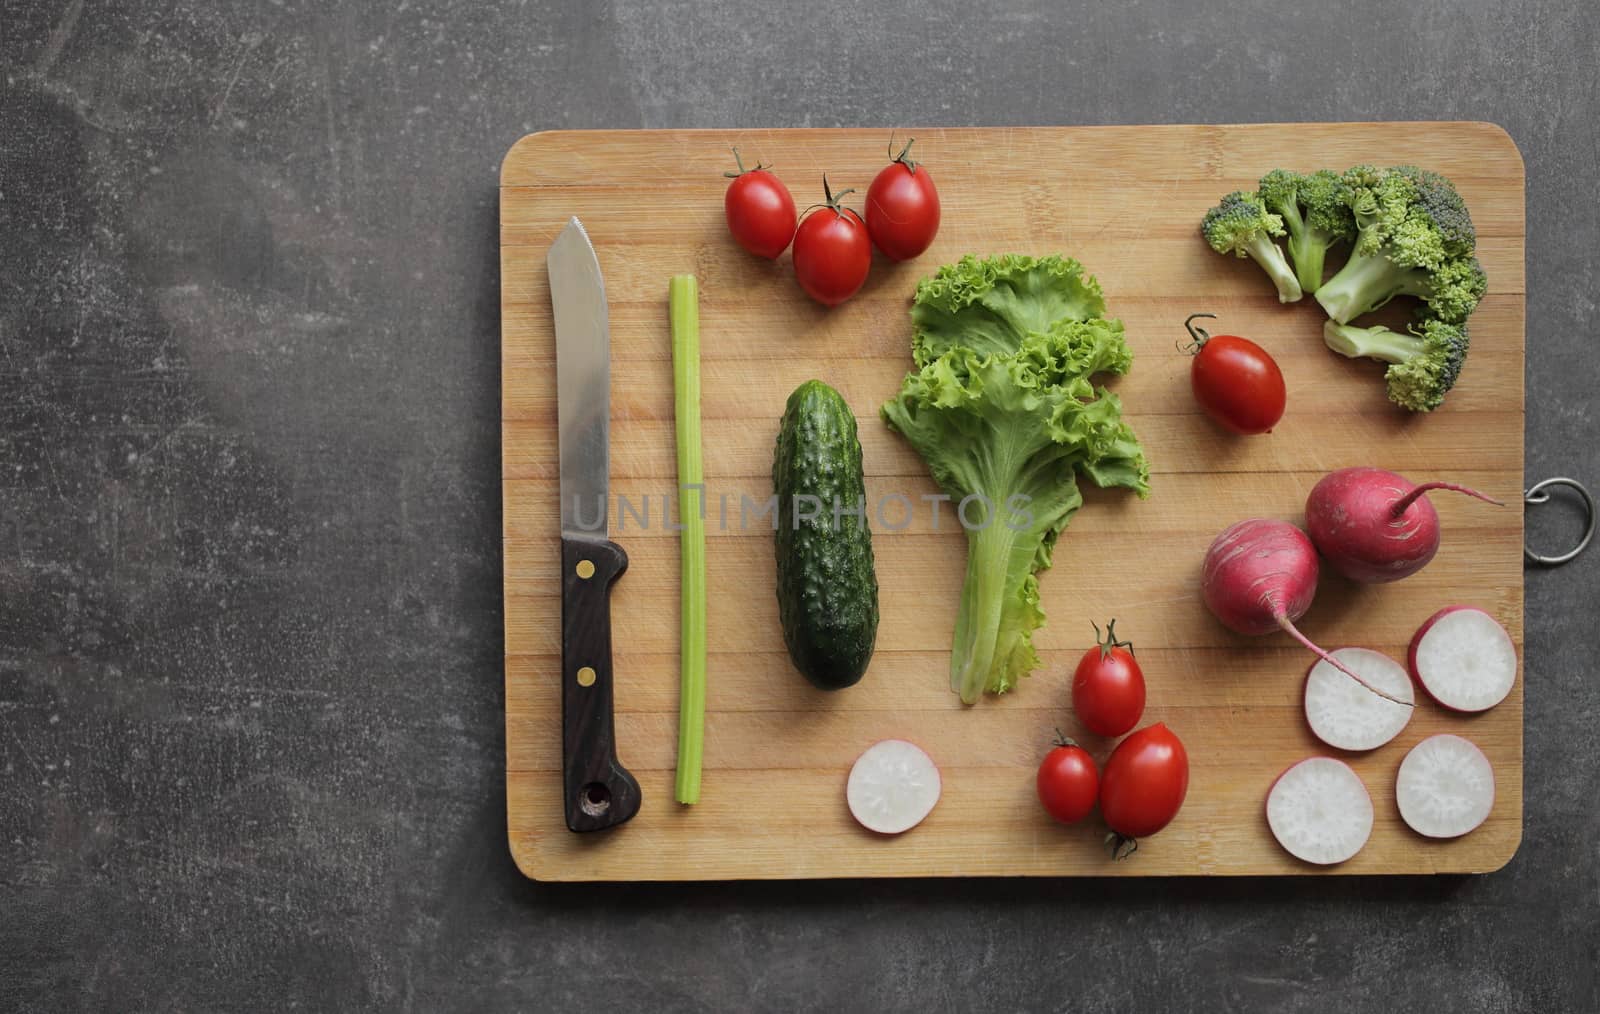 Fresh vegetables on a cutting board on a gray table Tomatoes, lettuce, broccoli, radish